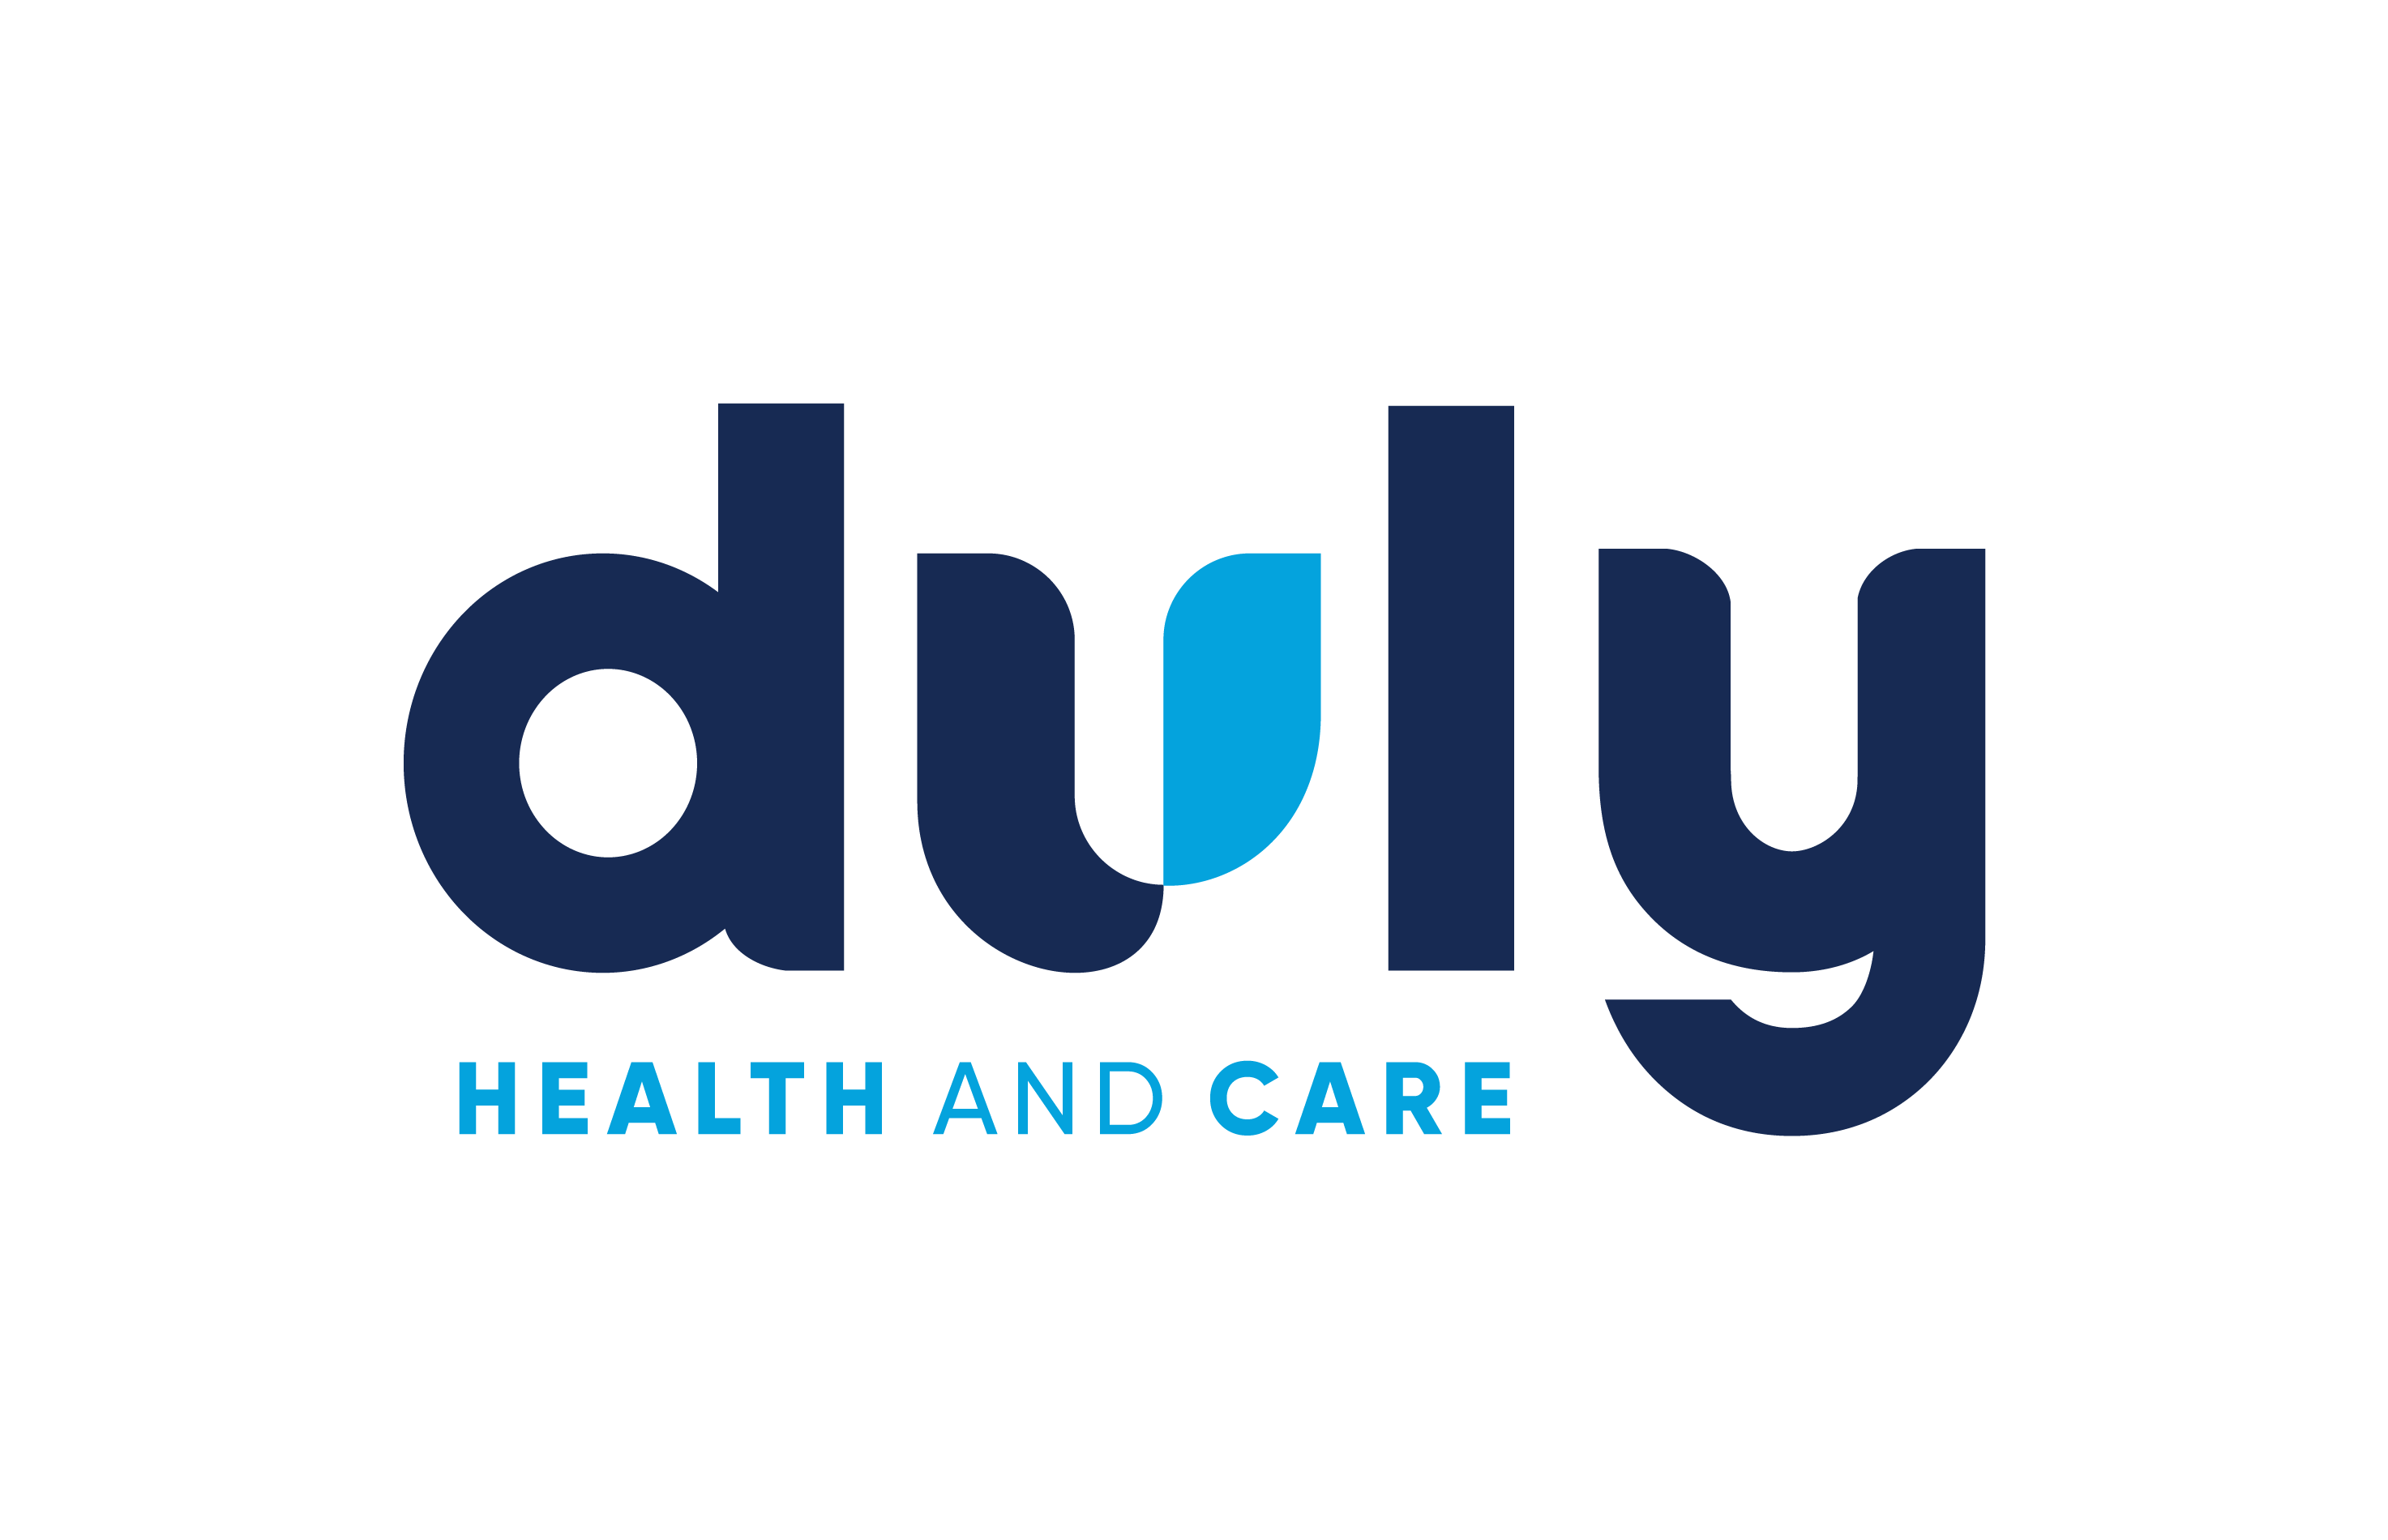 Duly Health and Care